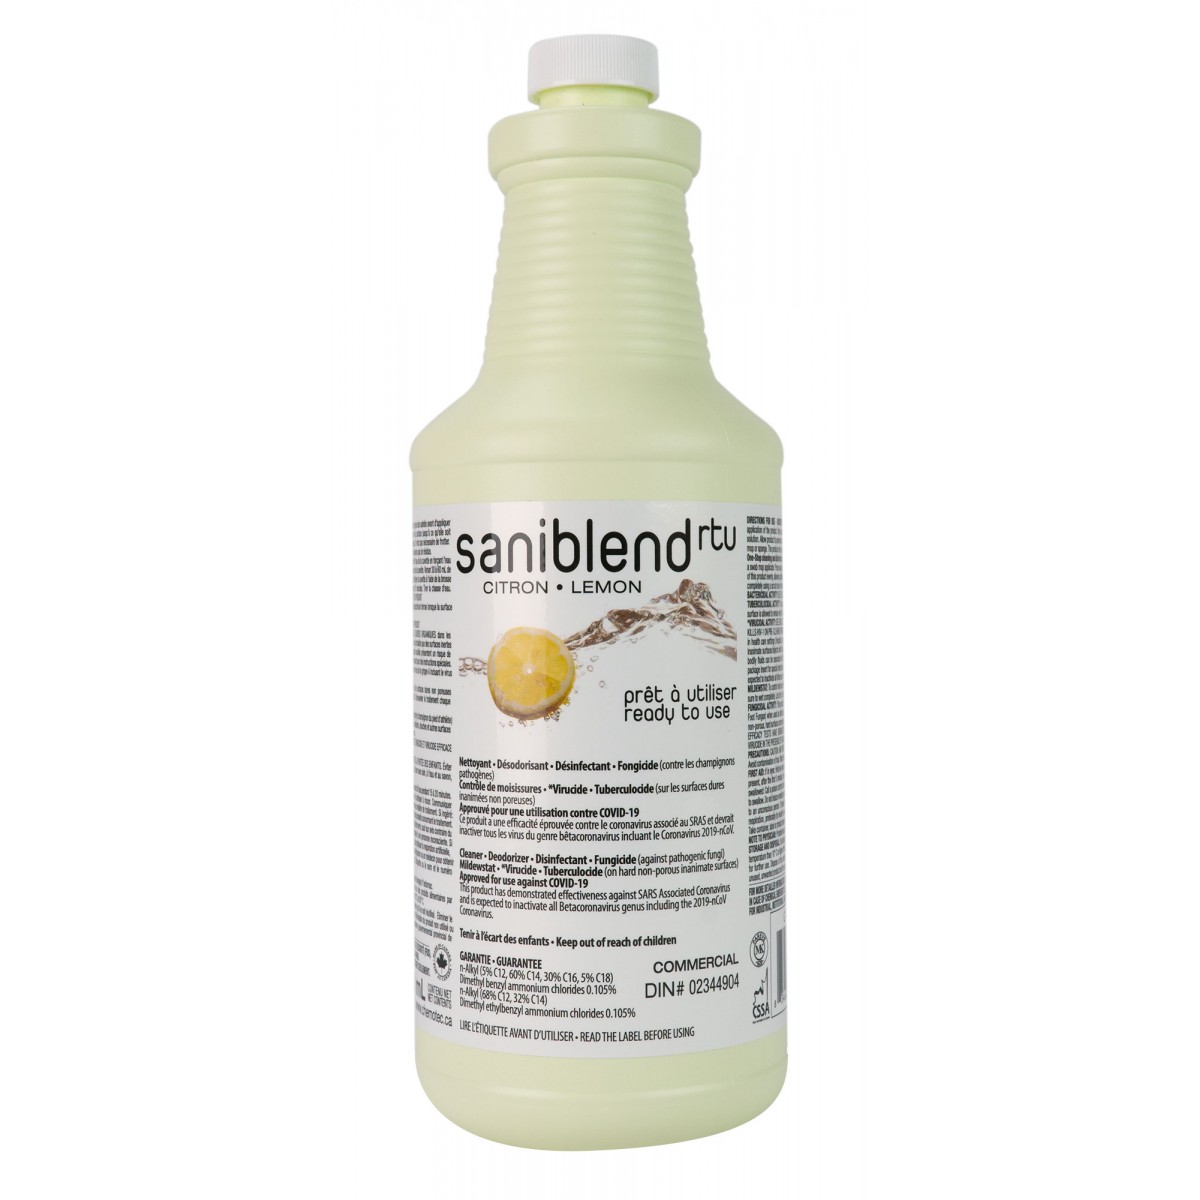 SANIBLEND RTU Ready to Use Disinfectant and Sanitizer, Lemon scent - 950ml - each